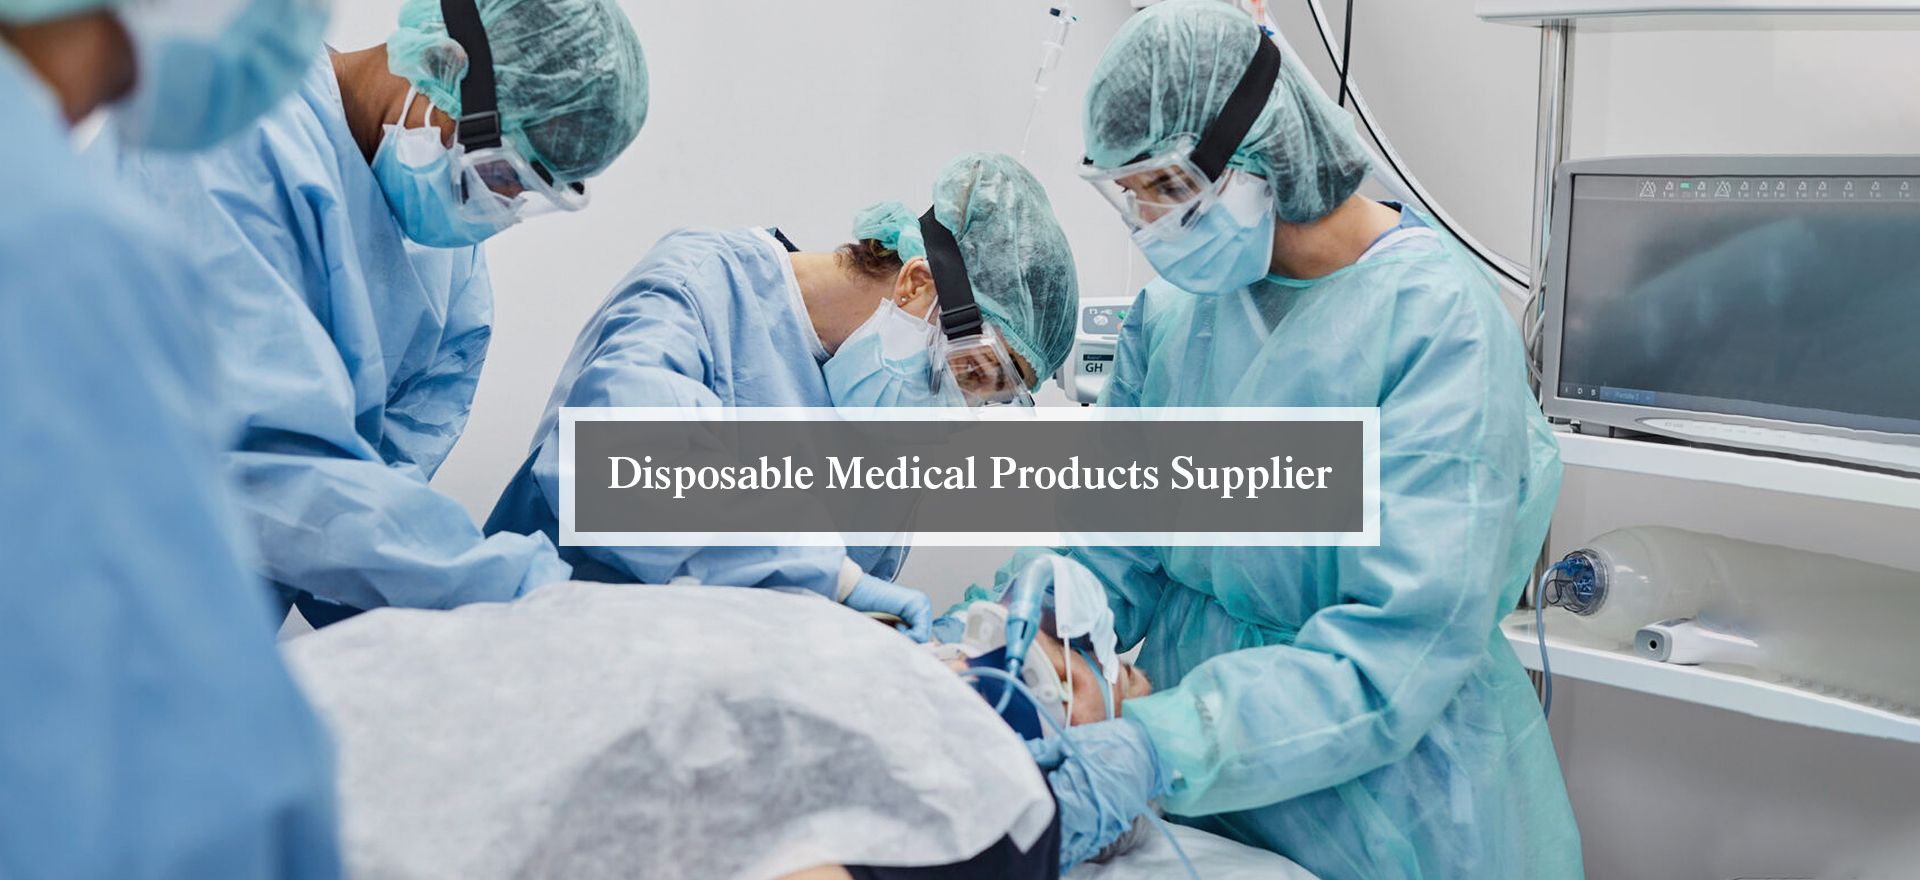 Disposable Medical Products Supplier